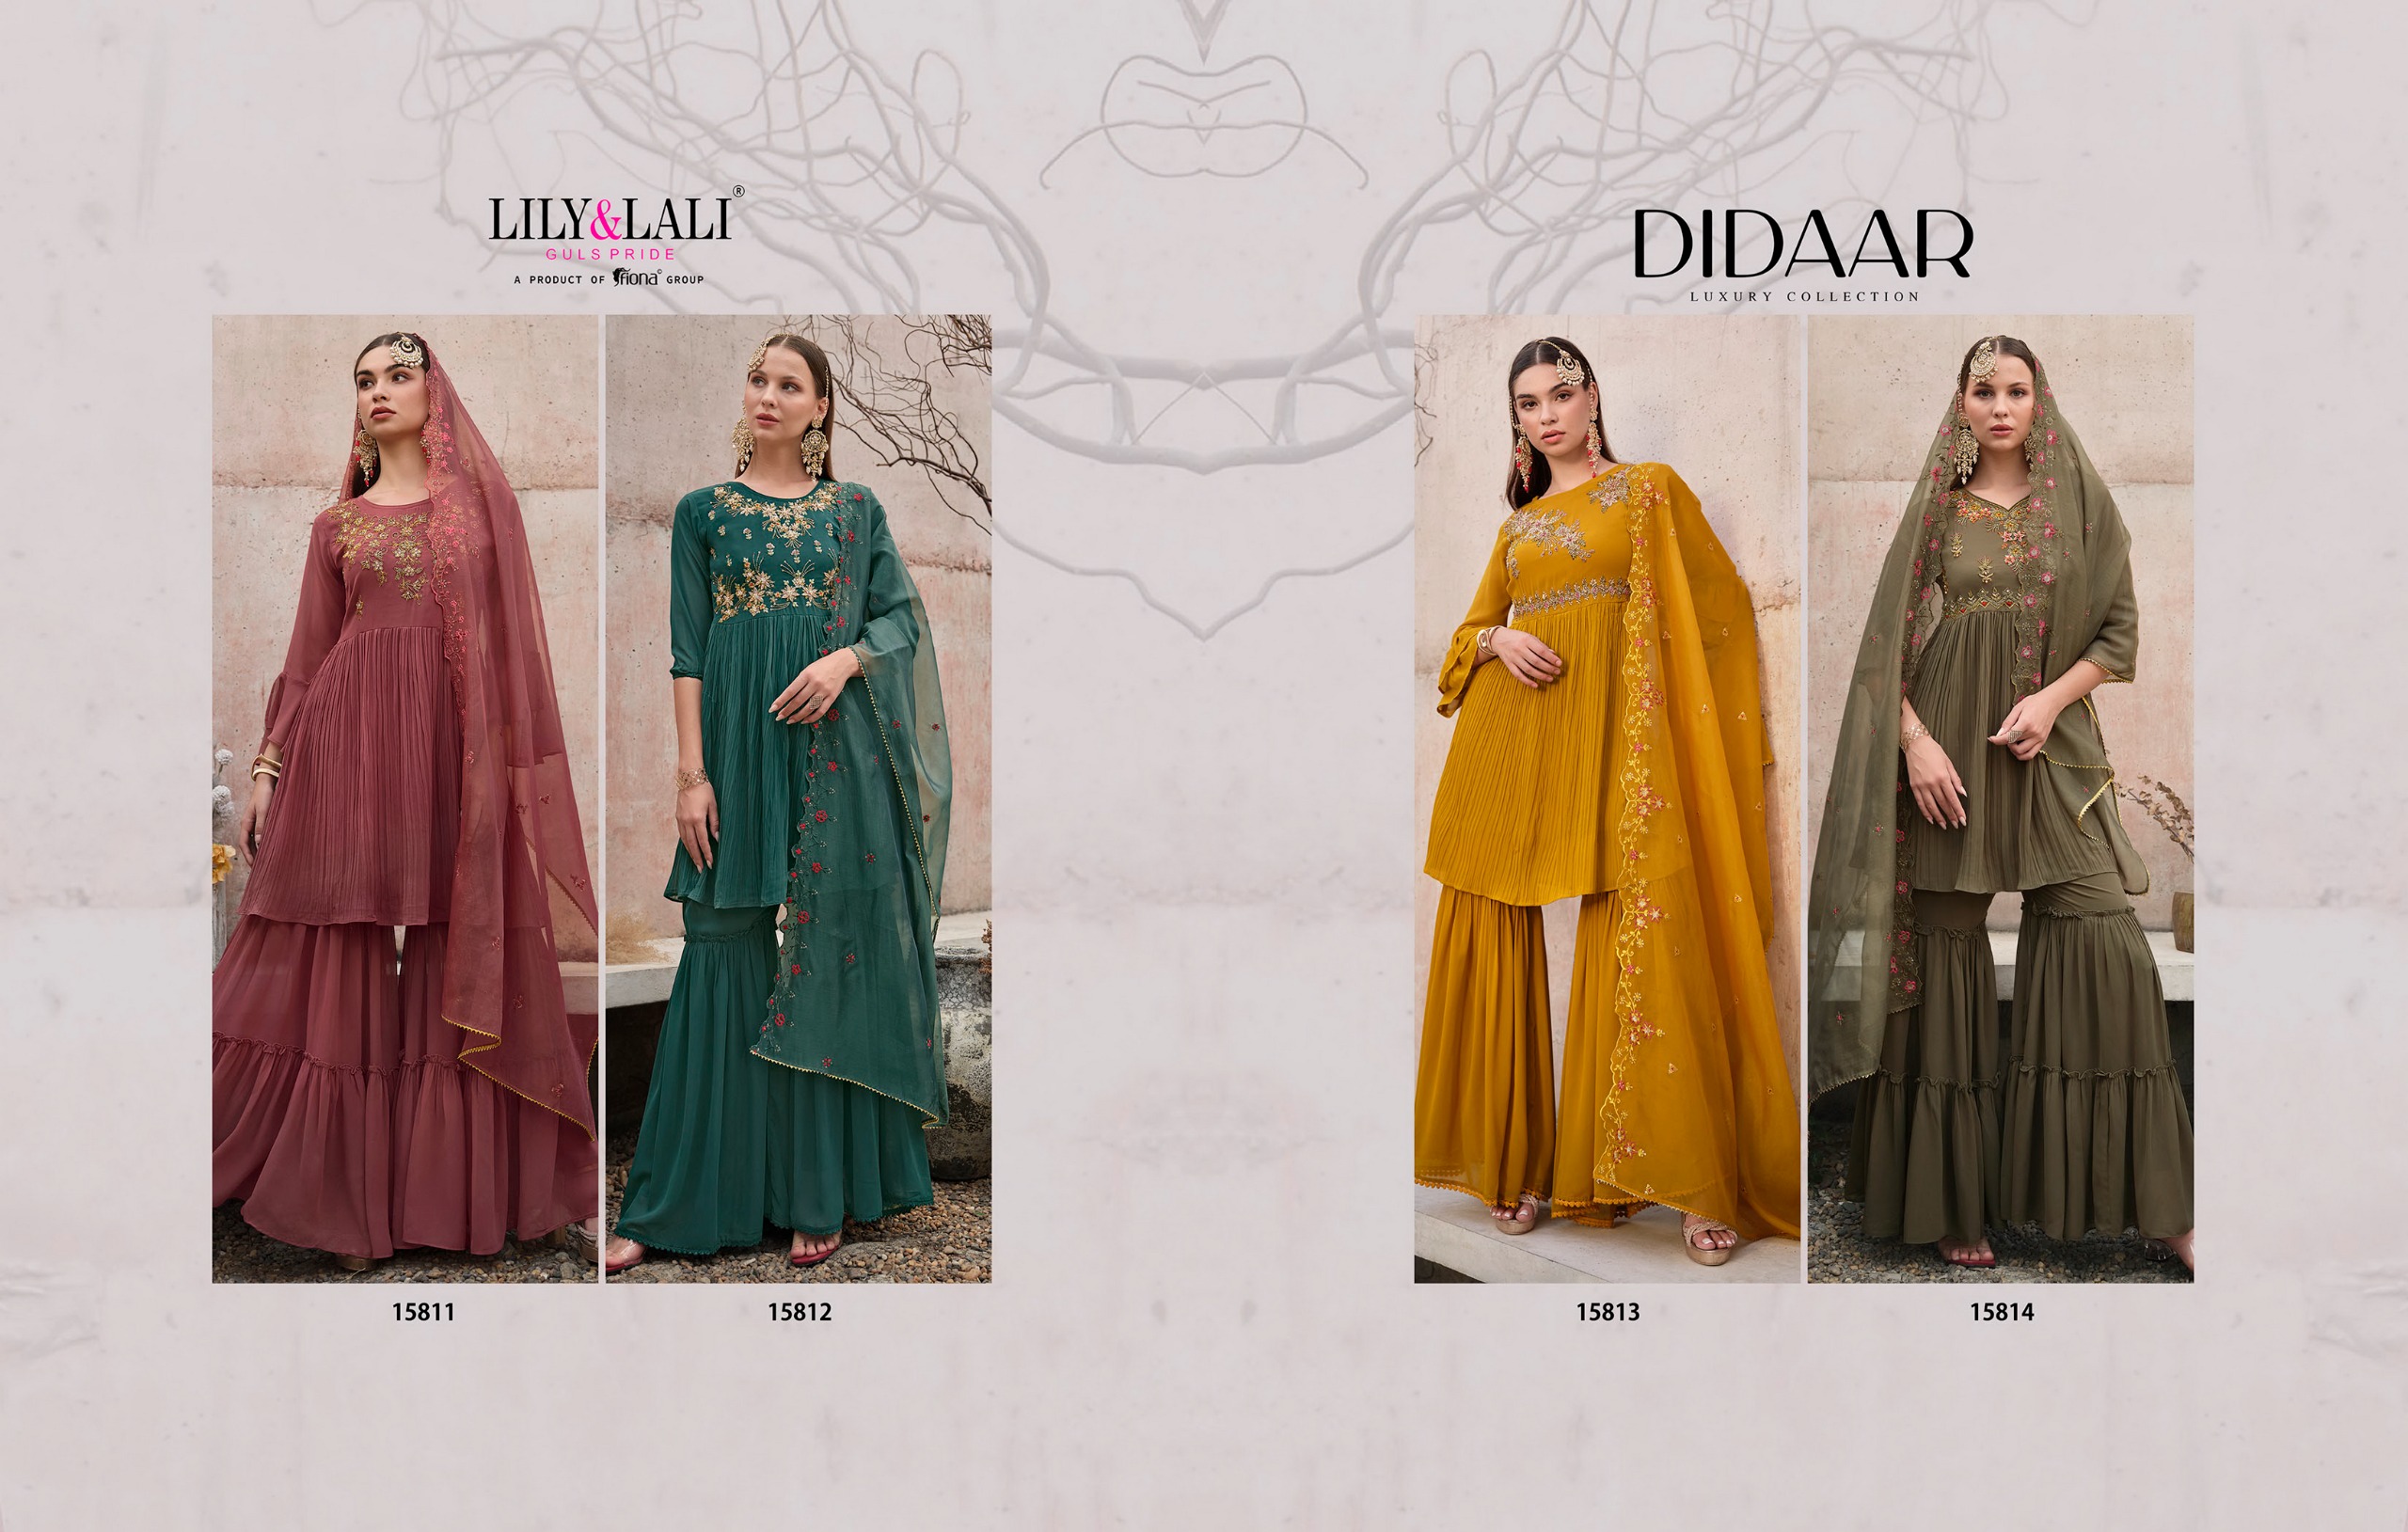 Lily And Lali Didaar collection 5